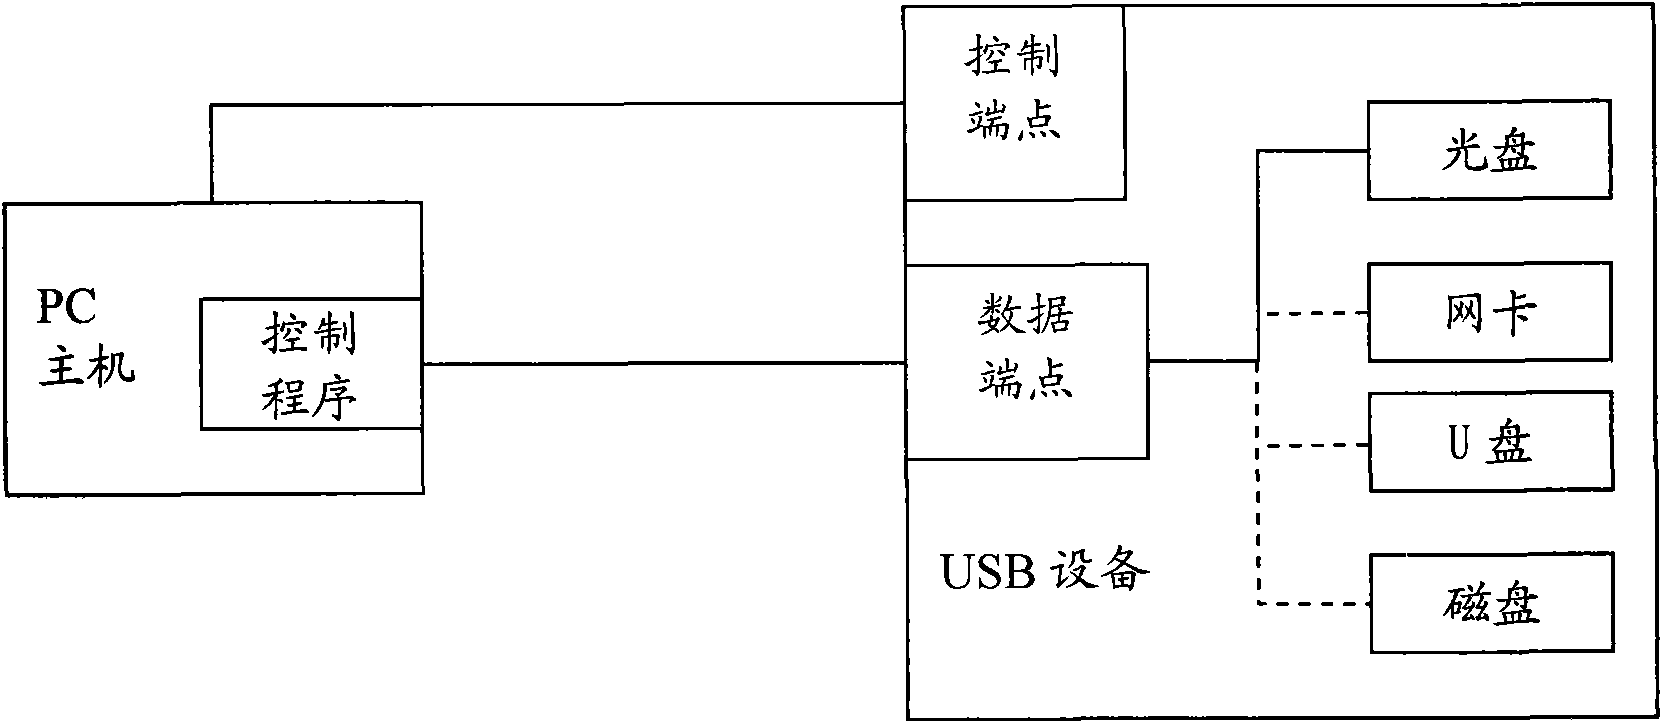 Method and equipment for realizing USB endpoint multiplexing